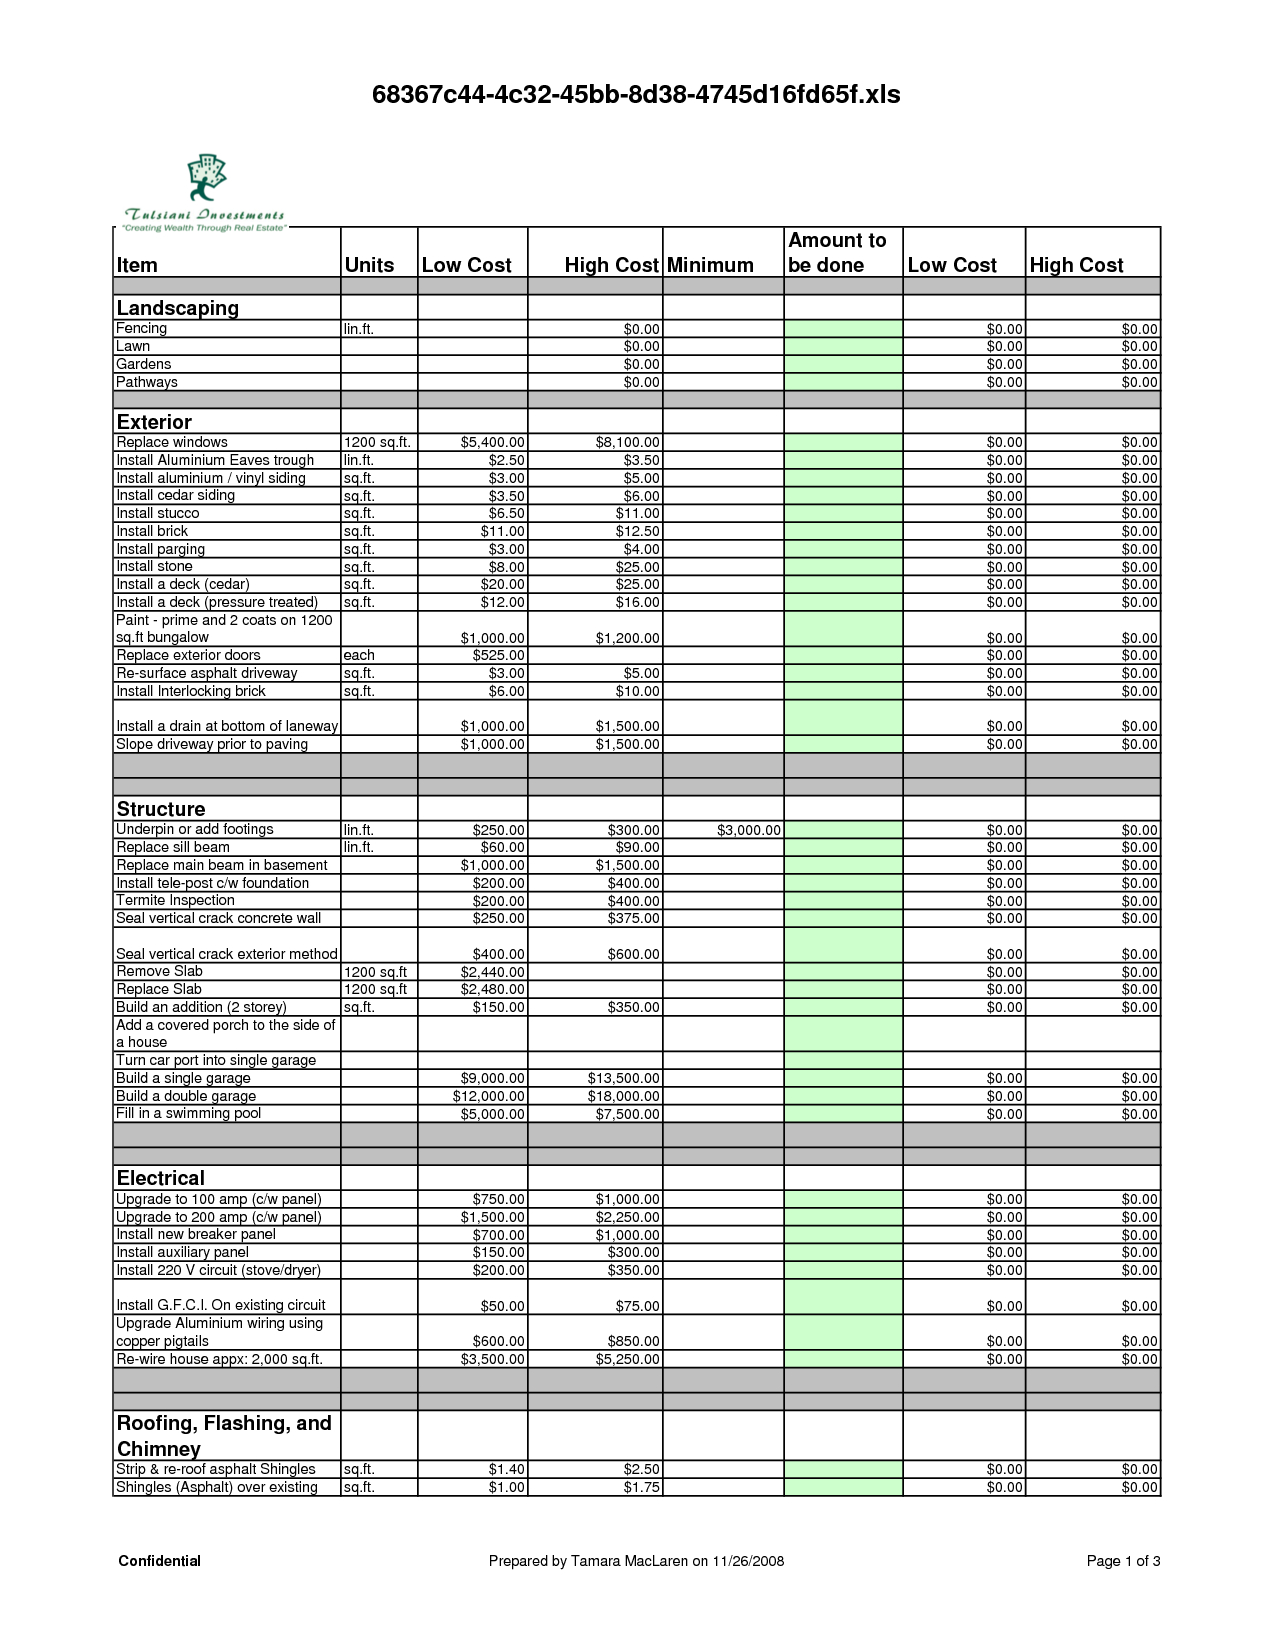 Project Cost Estimate Template Spreadsheet Inside Estimating Spreadsheets In Excel Free